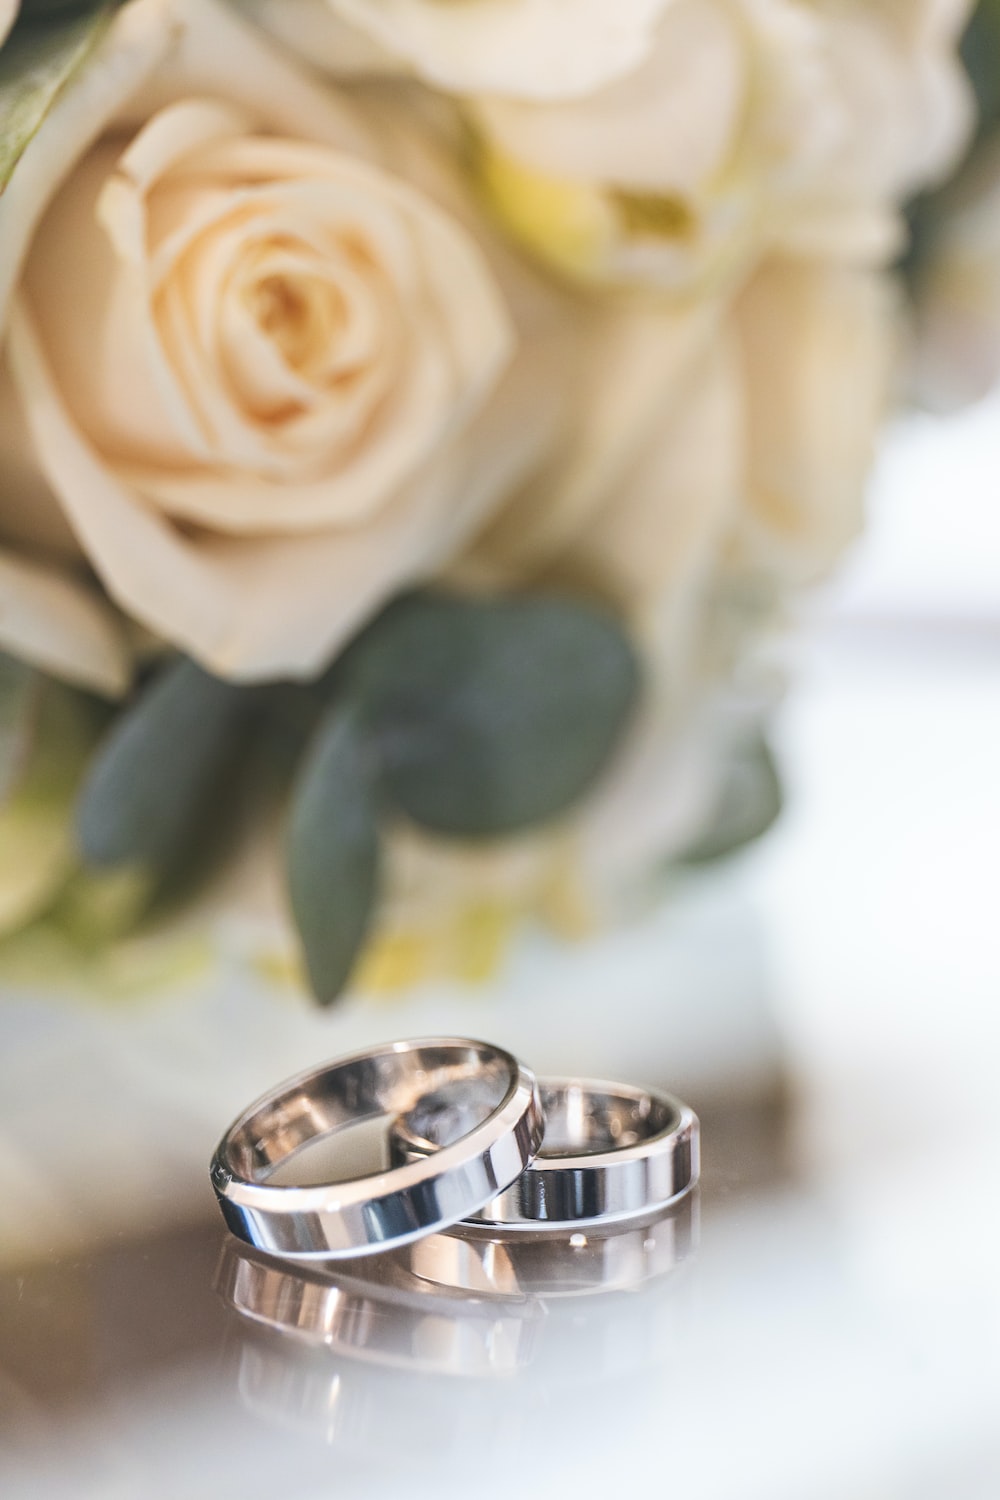 Wedding ring pictures download free images on